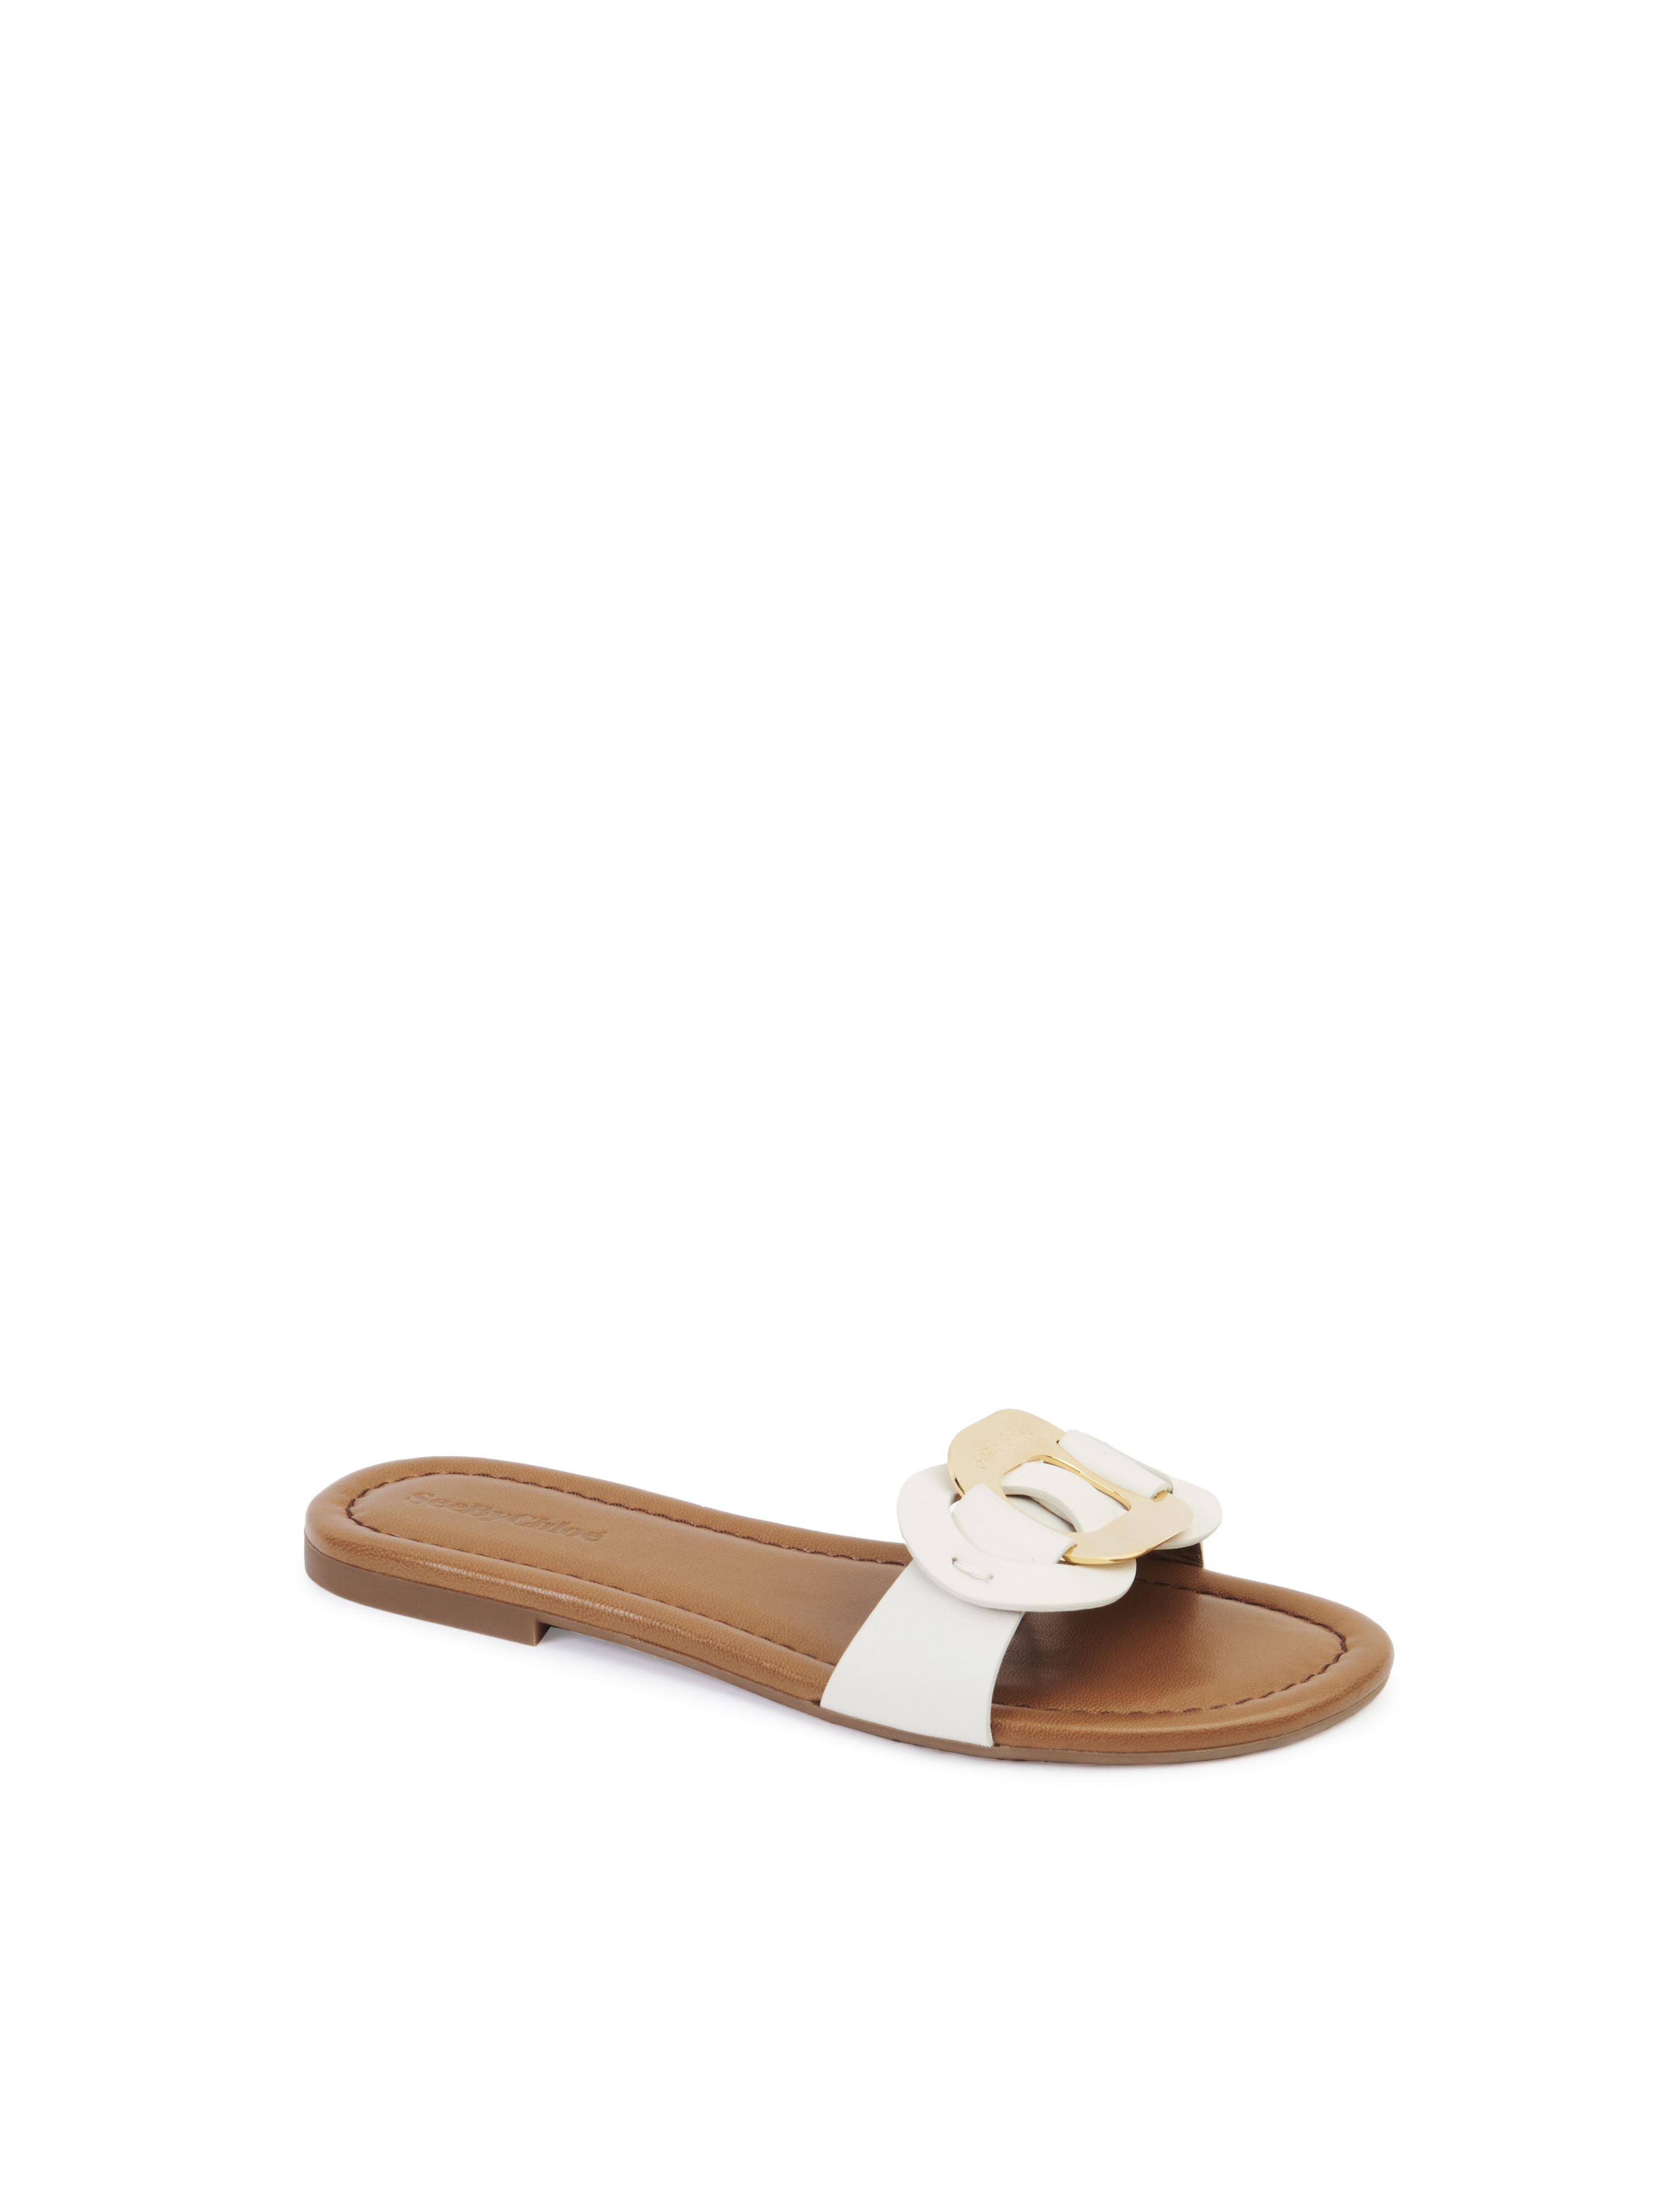 See By Chloé Chany Flat Mule in Natural | Lyst